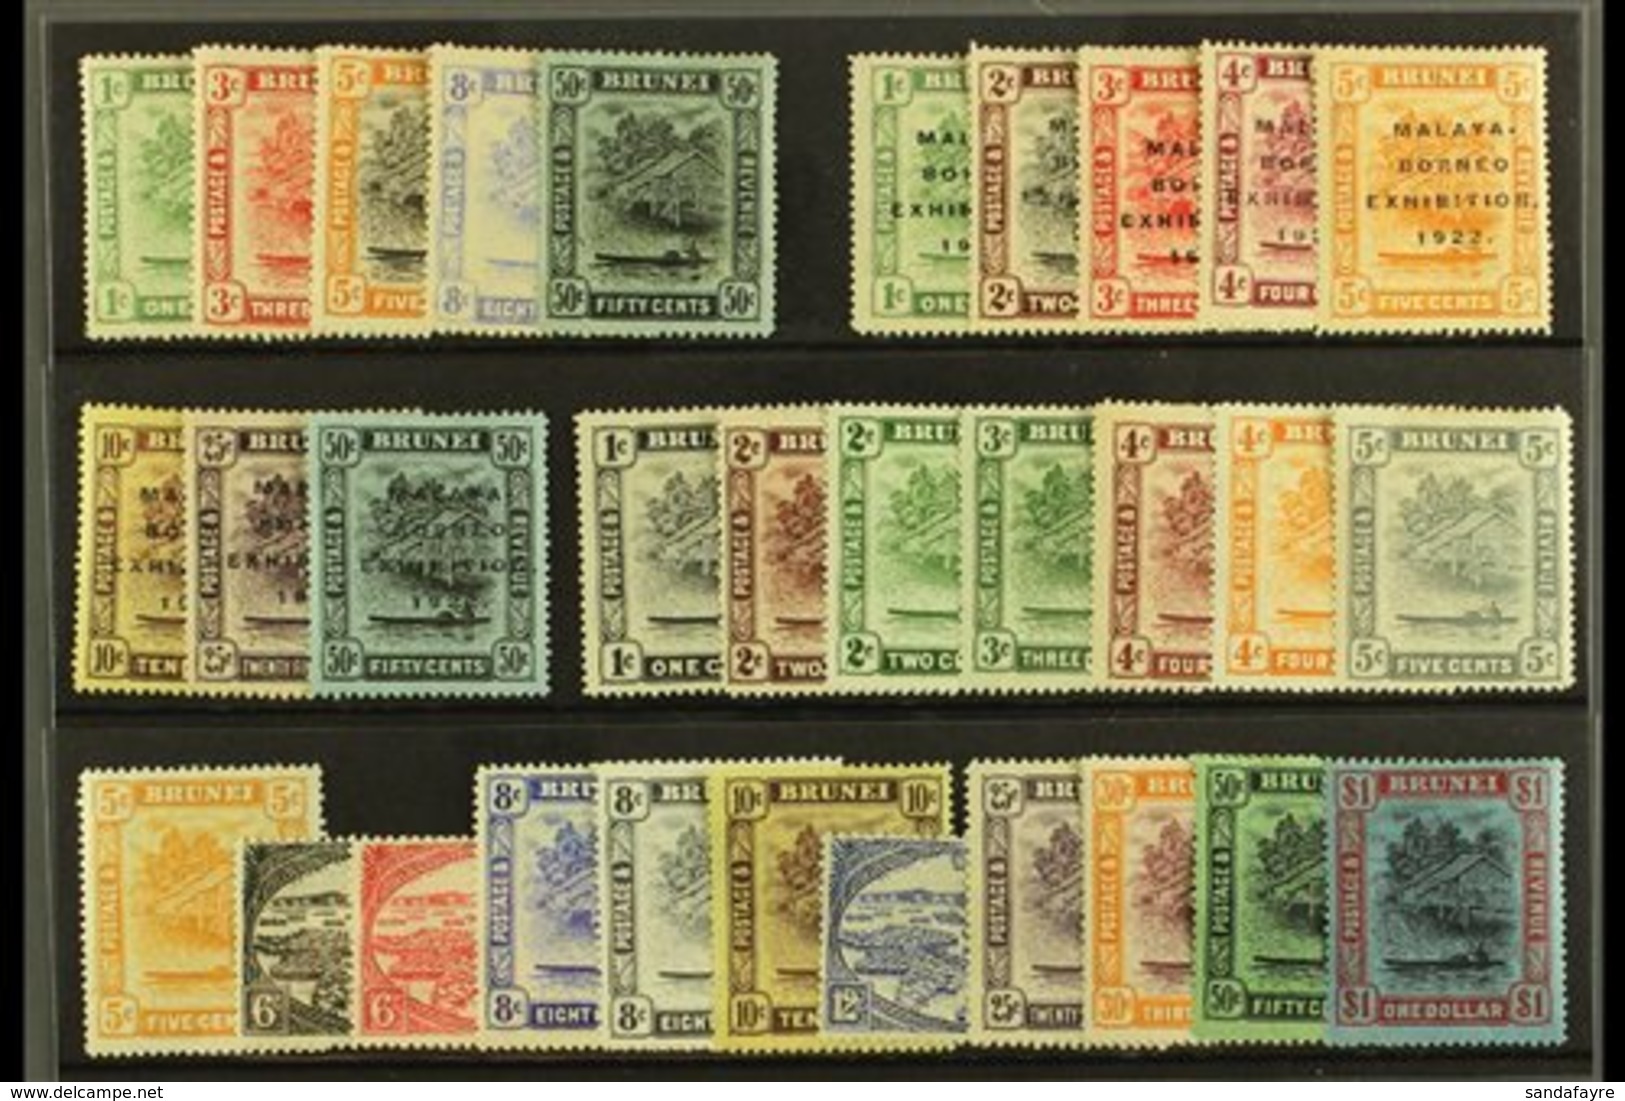 1908-37 MINT COLLECTION Presented On A Stock Card. Includes 1908-22 Vals To 50c, 1922 Opts Set To 50c, 1924-37 Set Of Al - Brunei (...-1984)